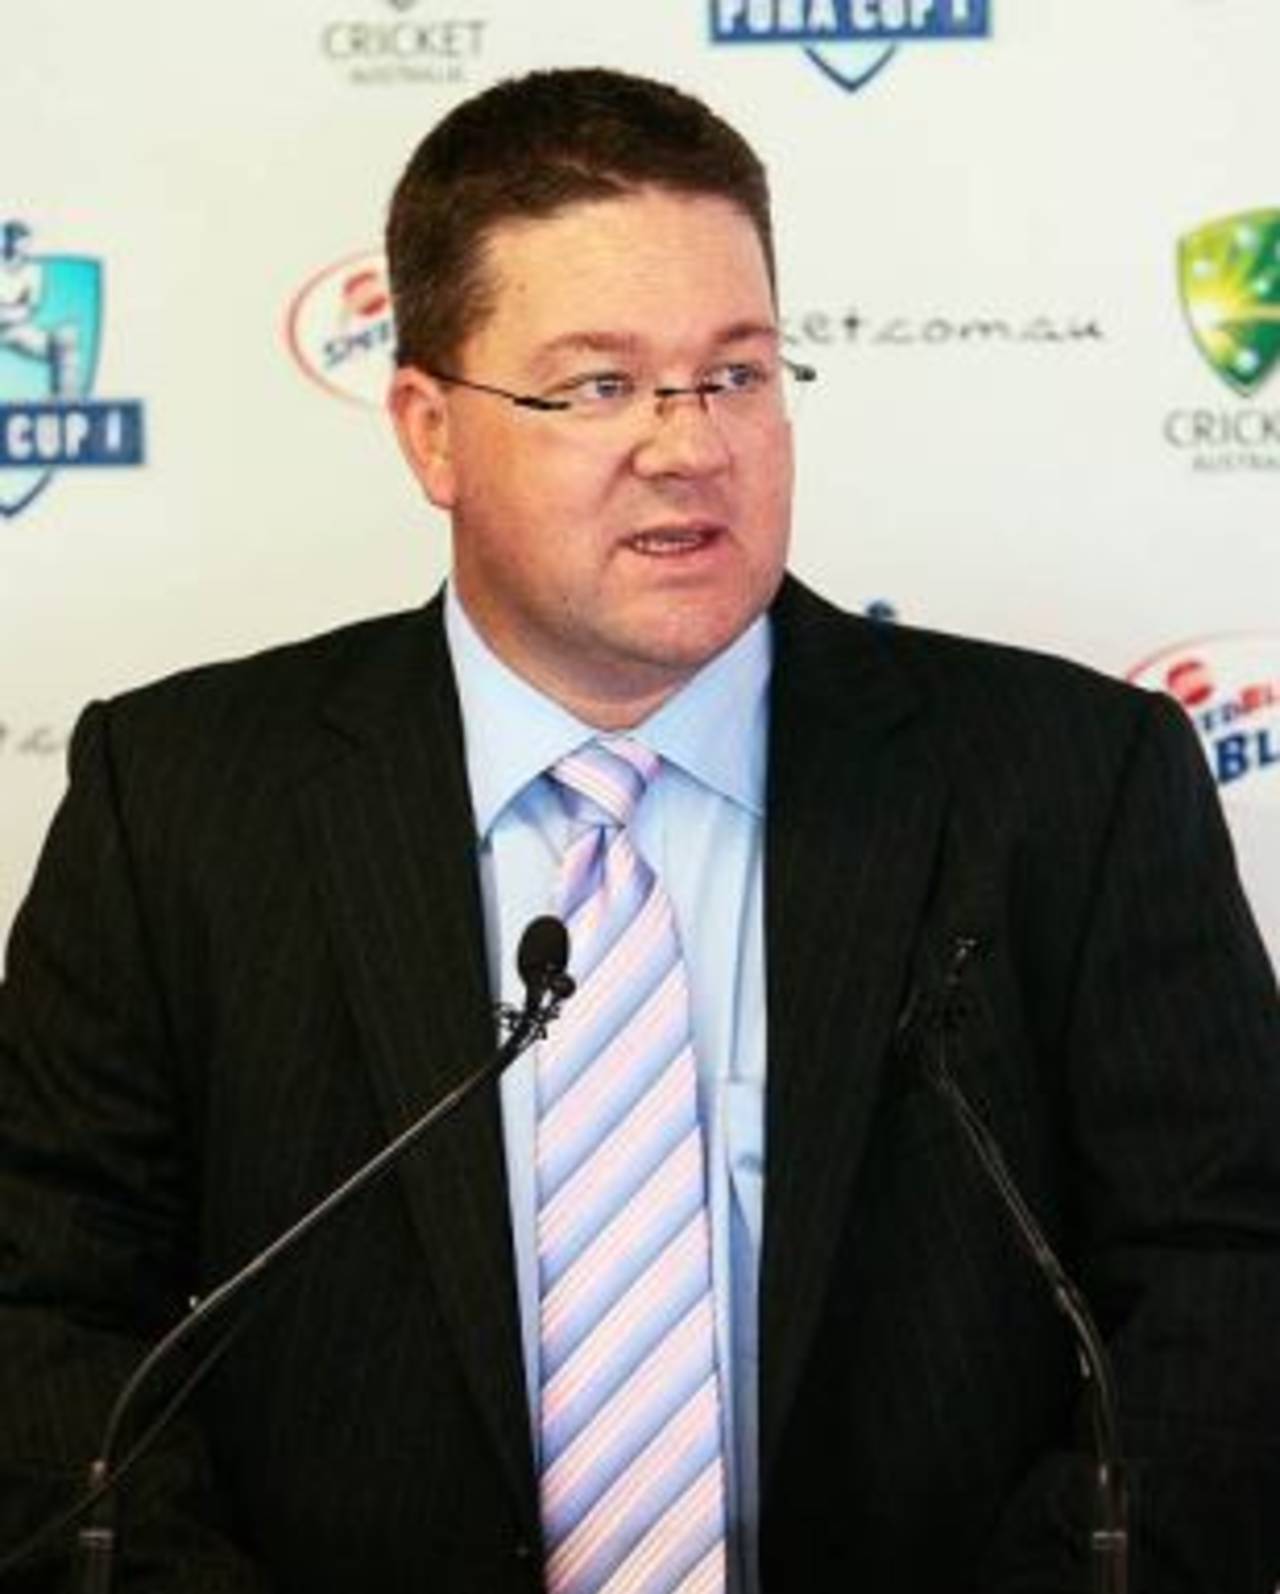 Paul Marsh, the chief executive officer of the Australian Cricketers' Association, Sydney, March 13, 2008